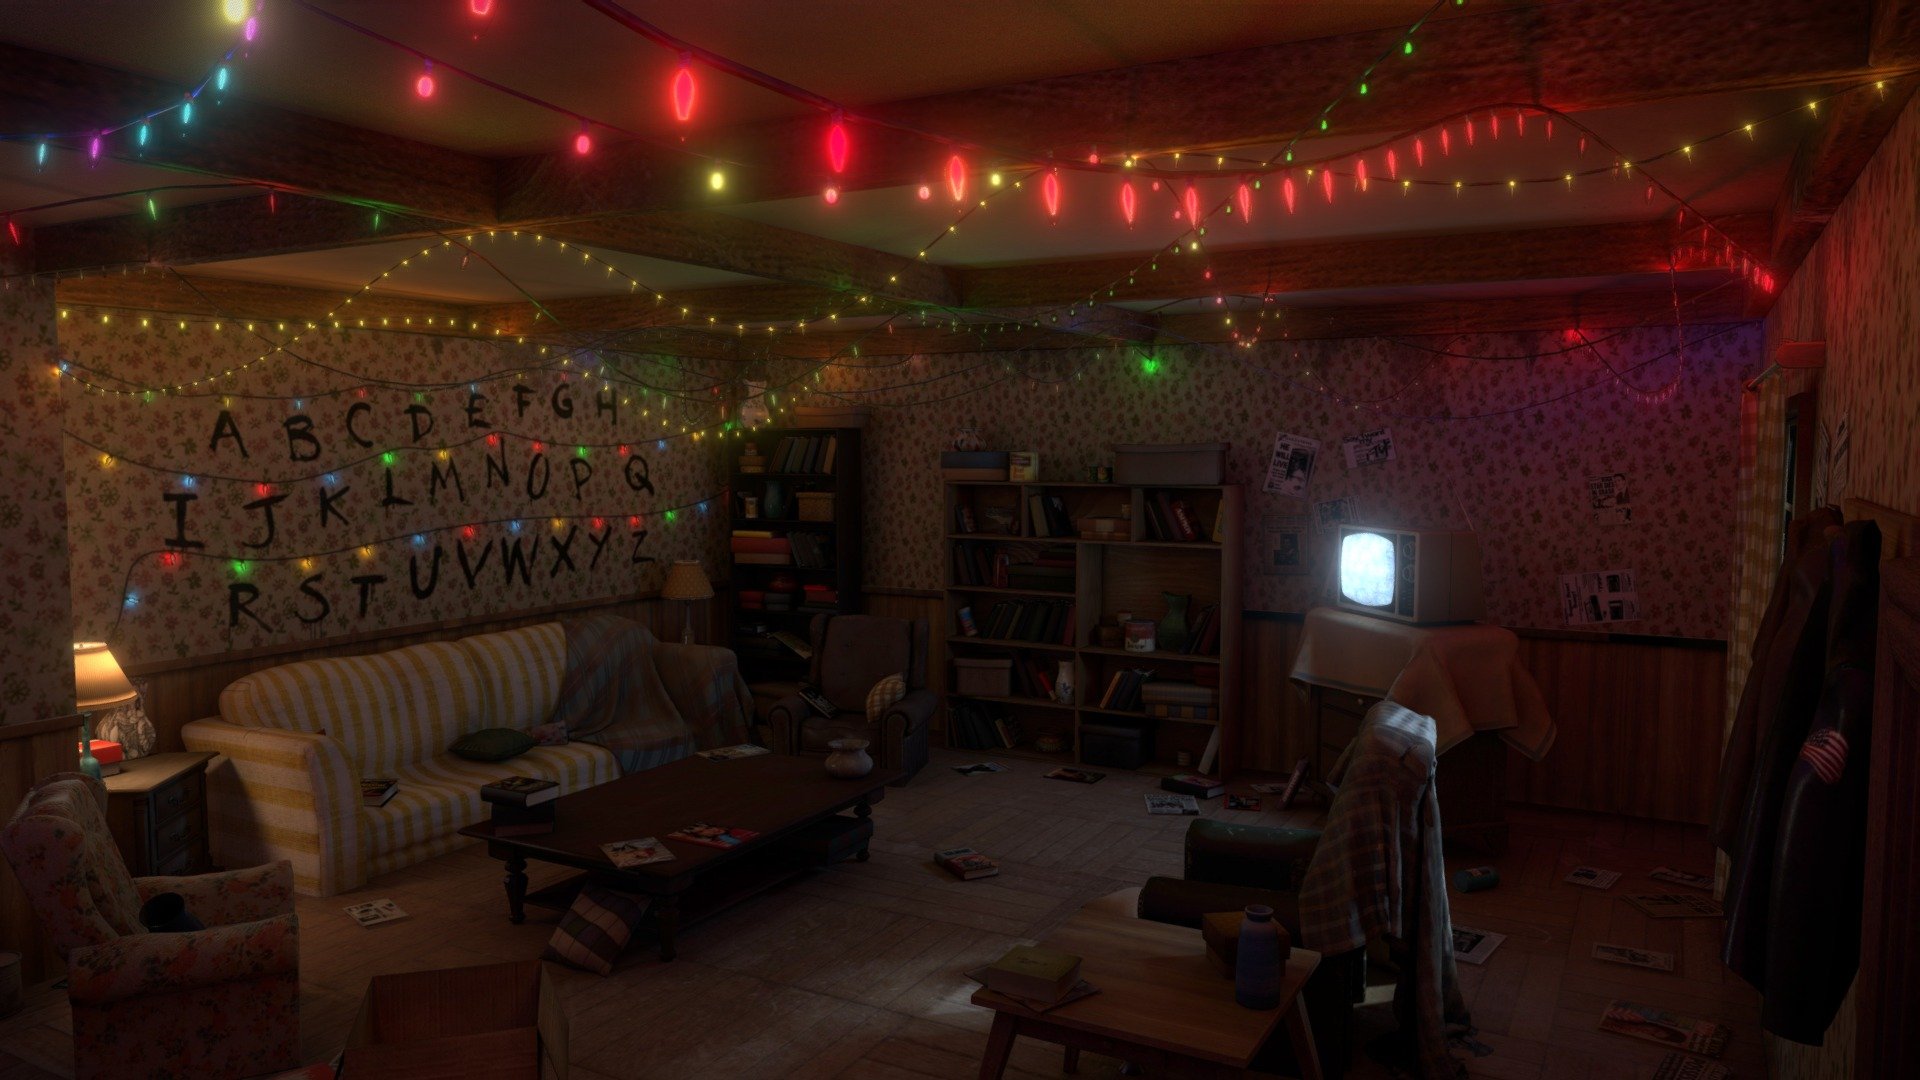 stranger things room scale vr experience